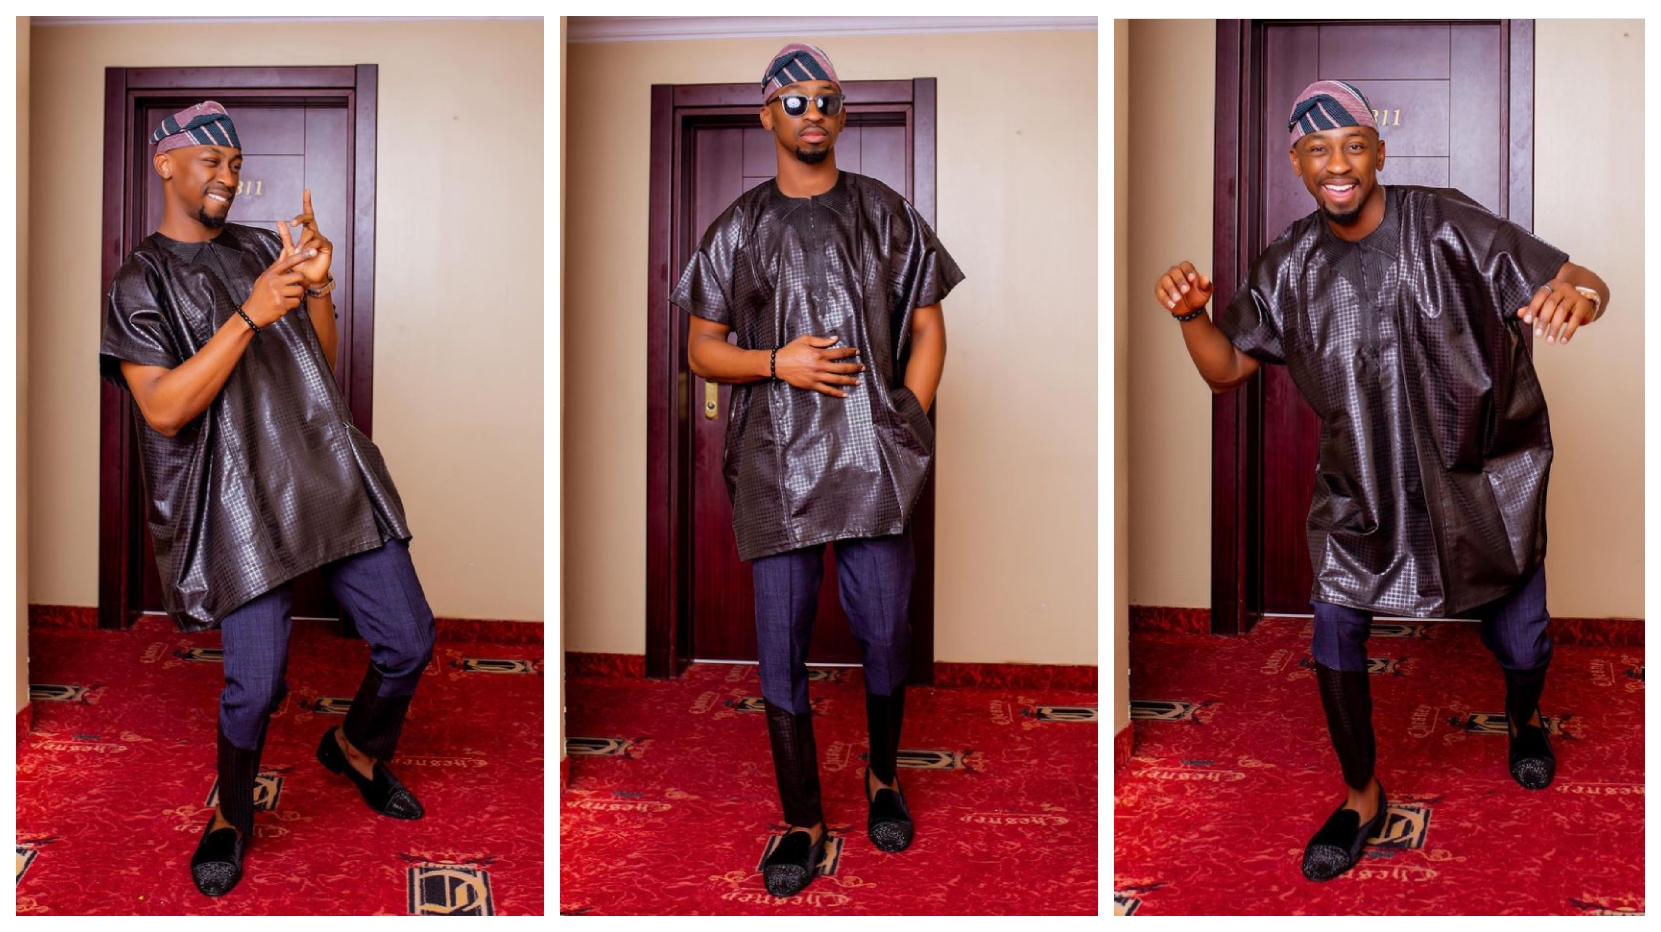 BBNaija: Saga steps out for his media round Day 3, says "Omoluabi is on the move again" (See pictures)